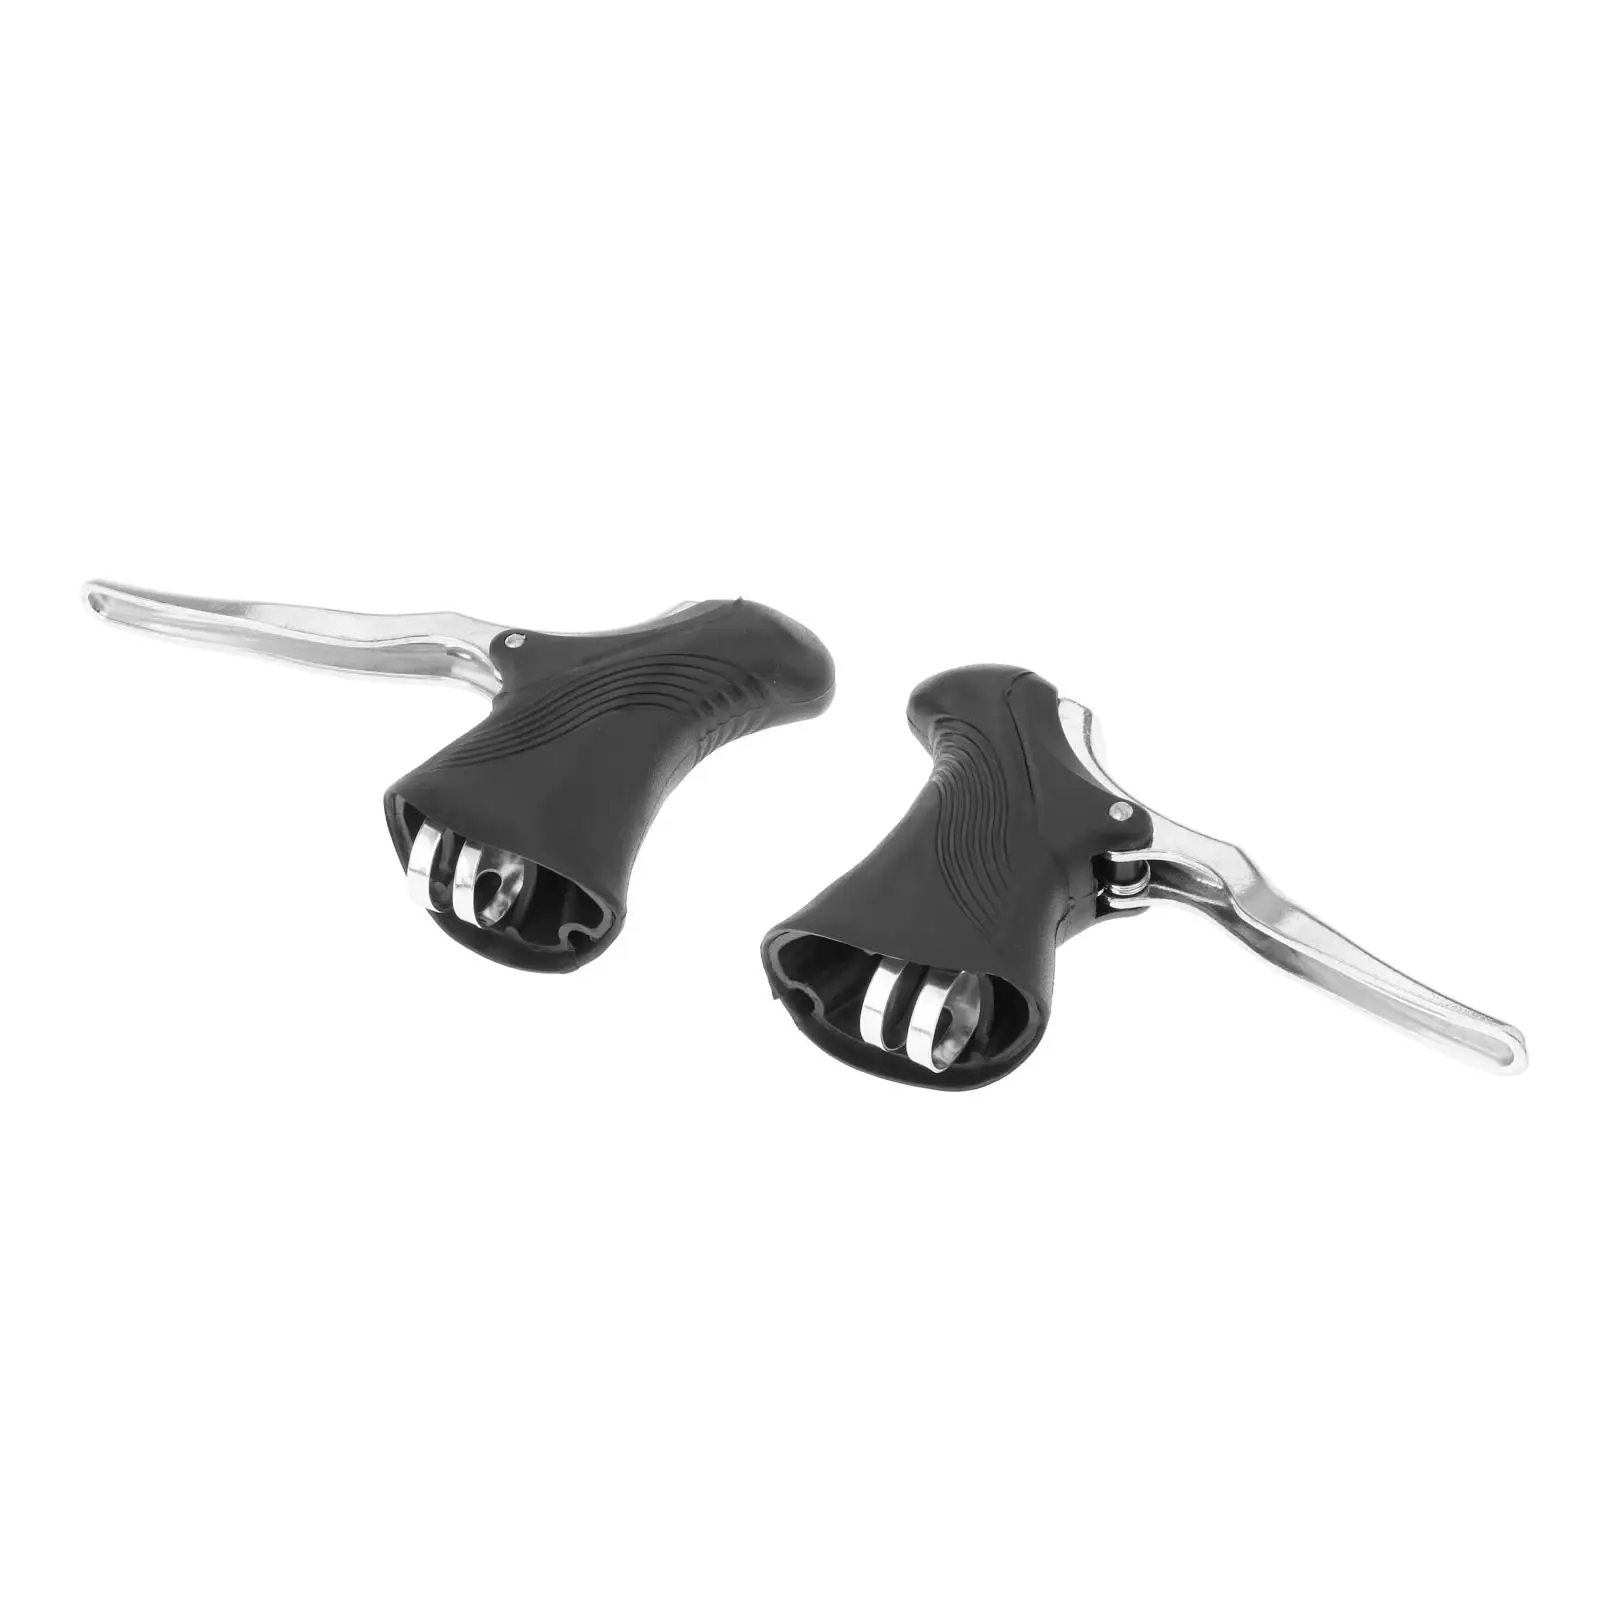 Bike Brake Lever Road Bicycle Racing Handle Drop Bar Levers Replacement Aluminum Alloy for 22.2 - 23.8 mm Cycle